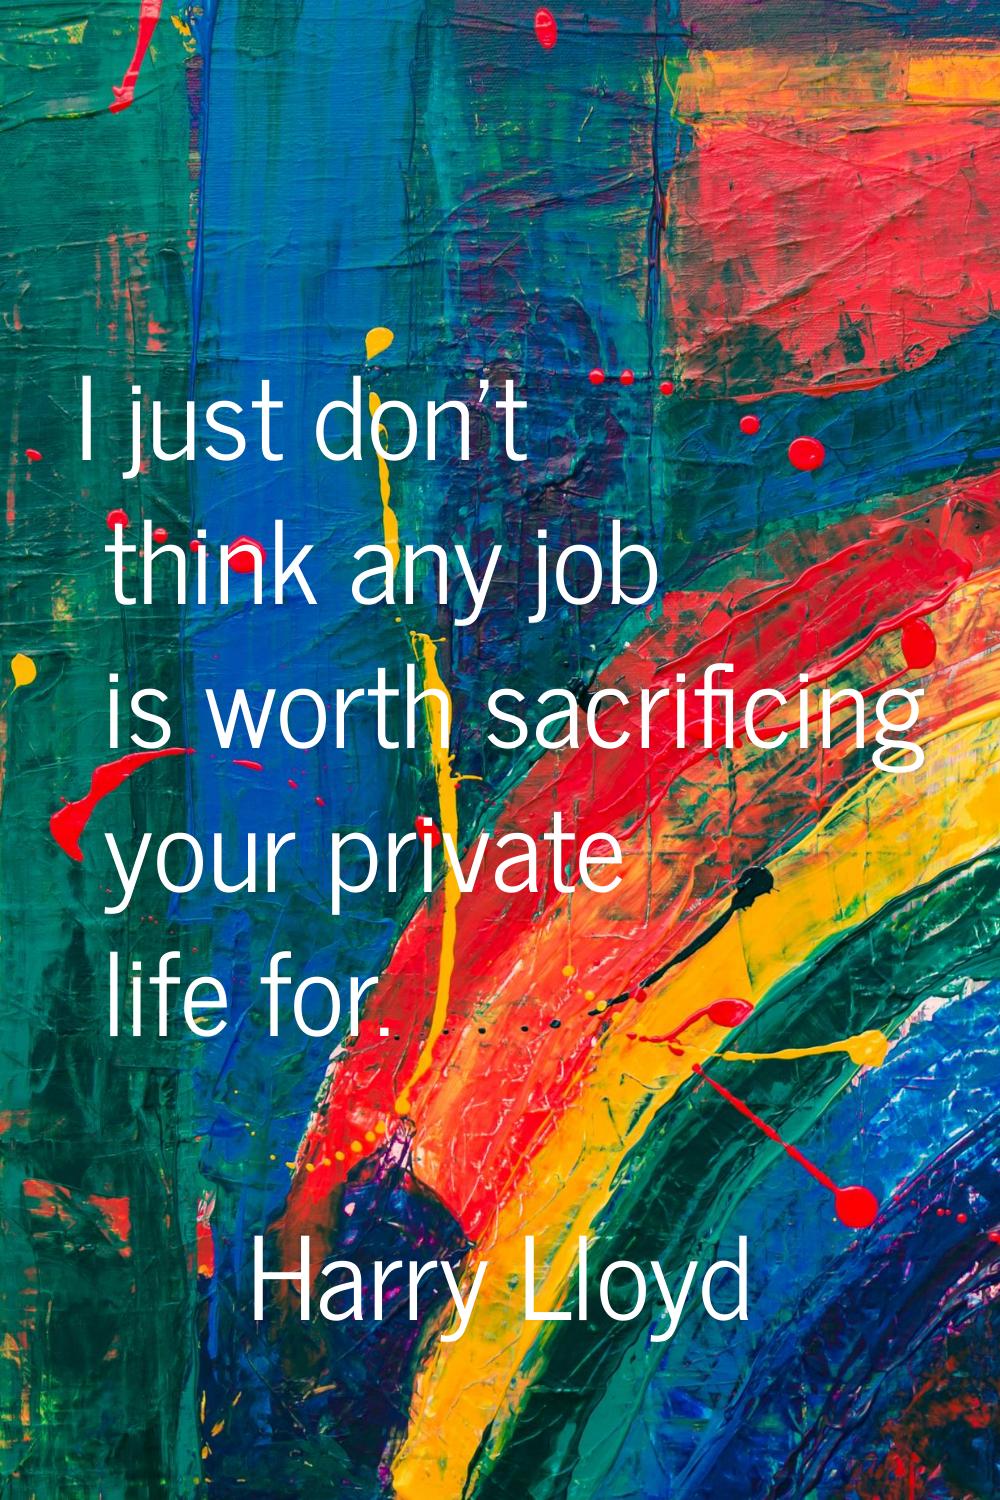 I just don't think any job is worth sacrificing your private life for.